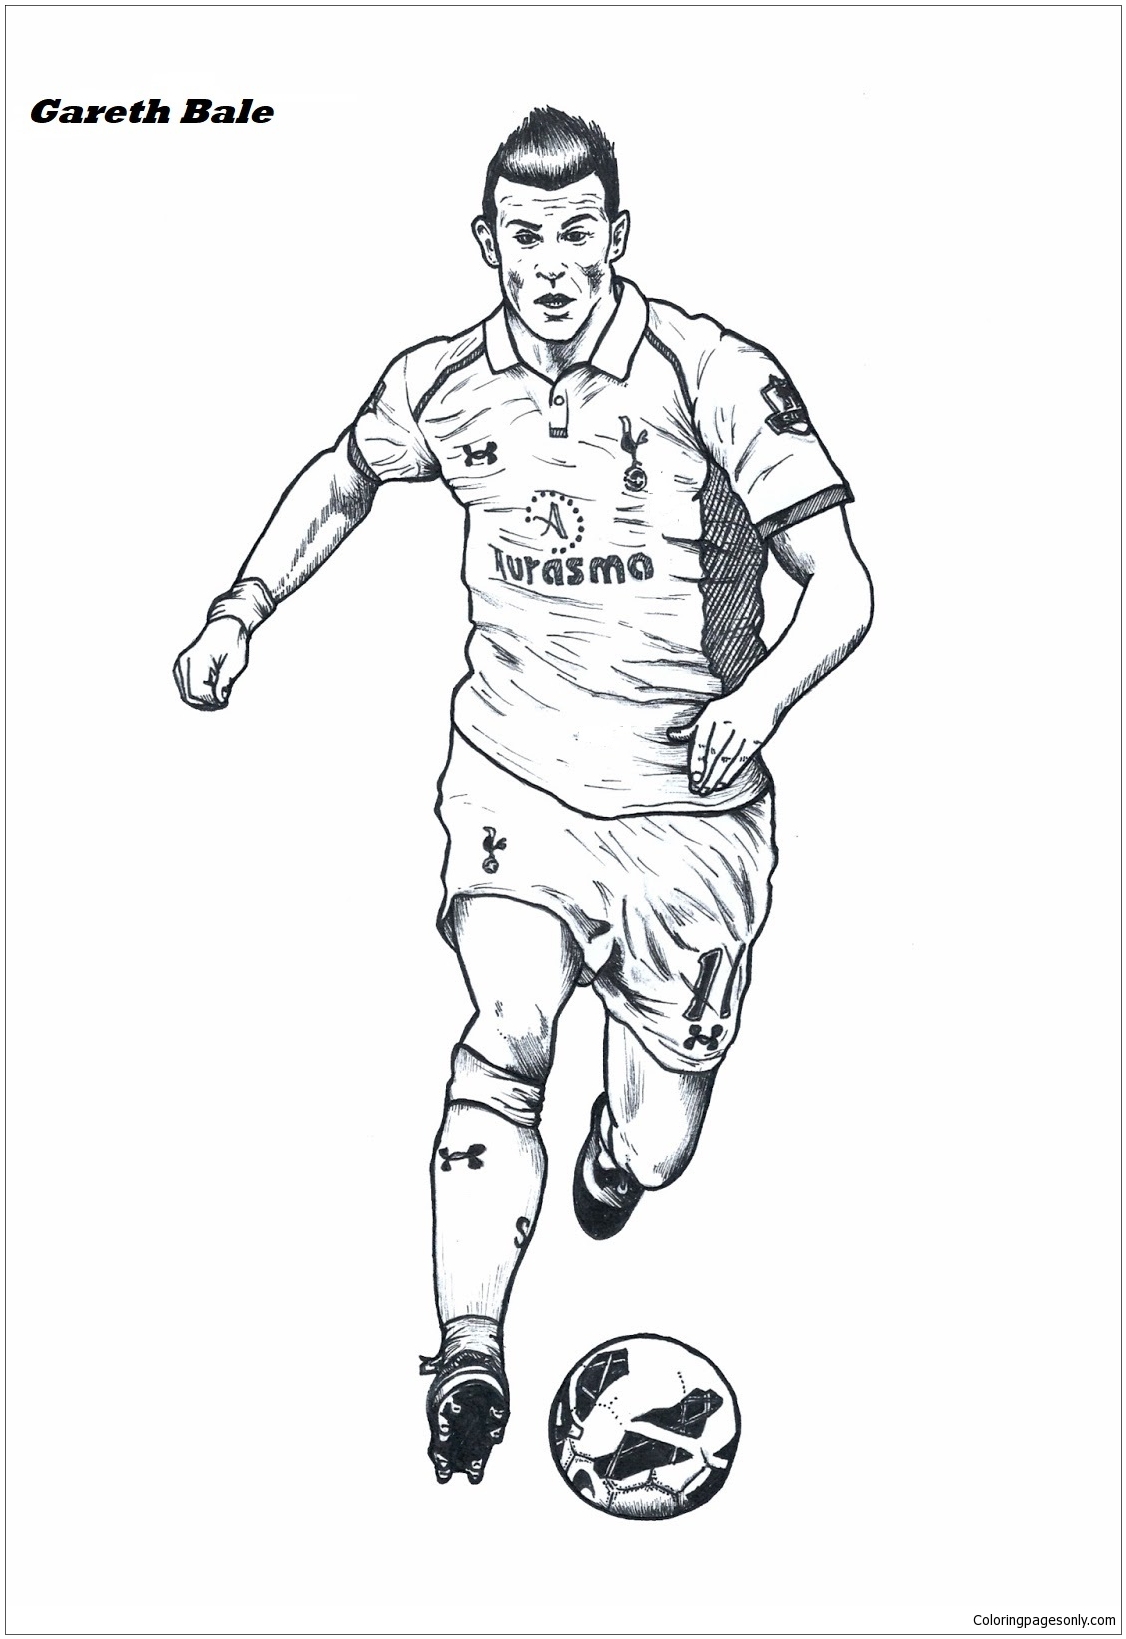 Gareth Bale-image 2 Coloring Pages